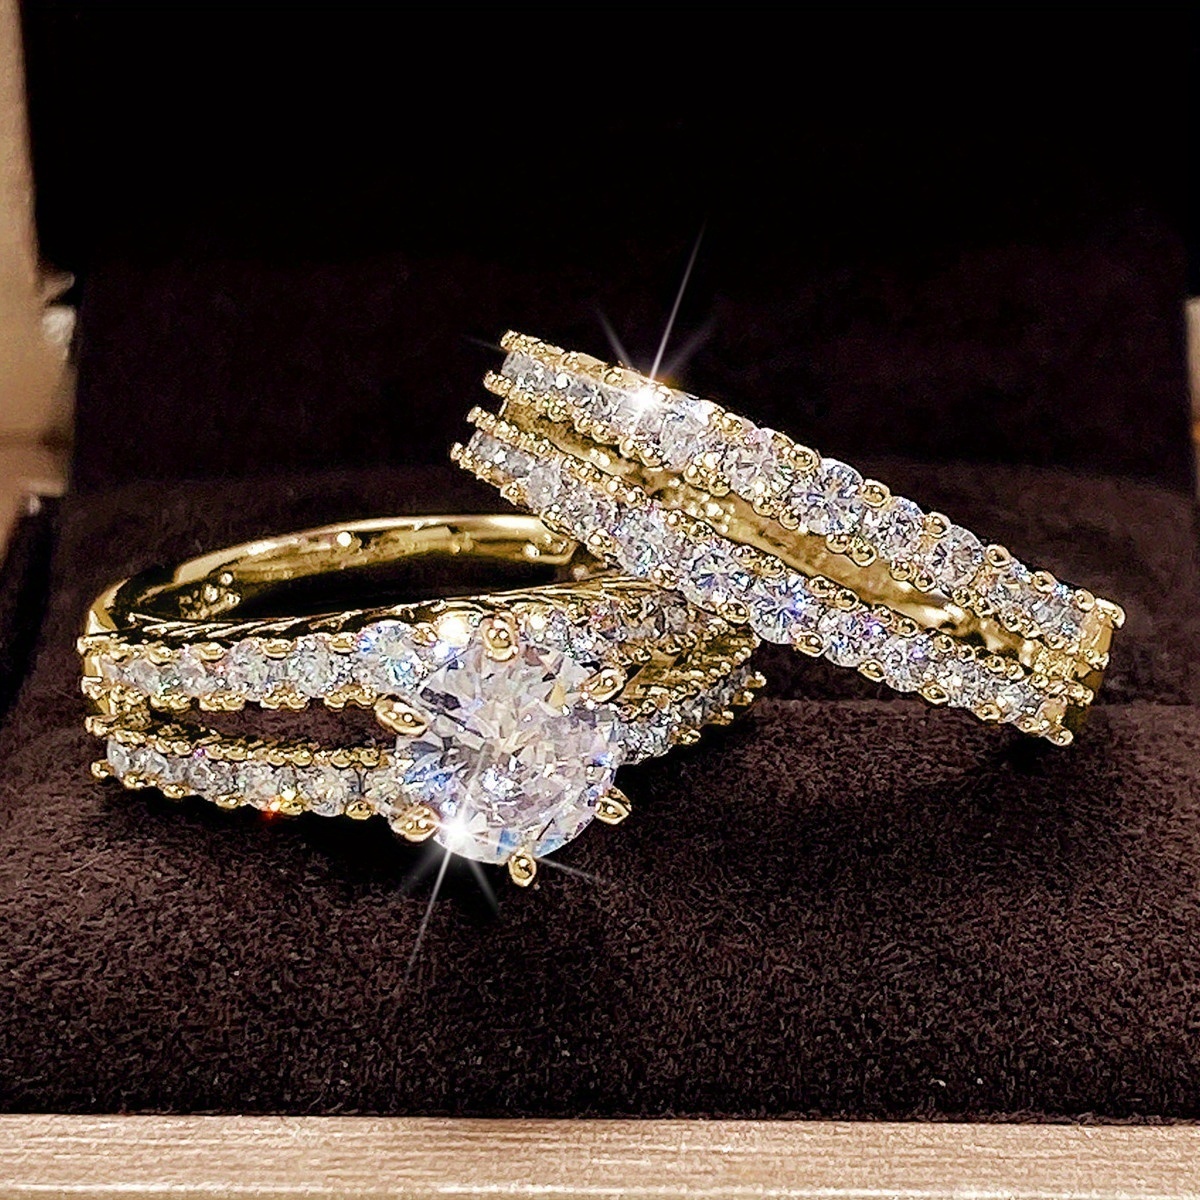 Chic 11 Pieces Gold Tone Metal Ring Set